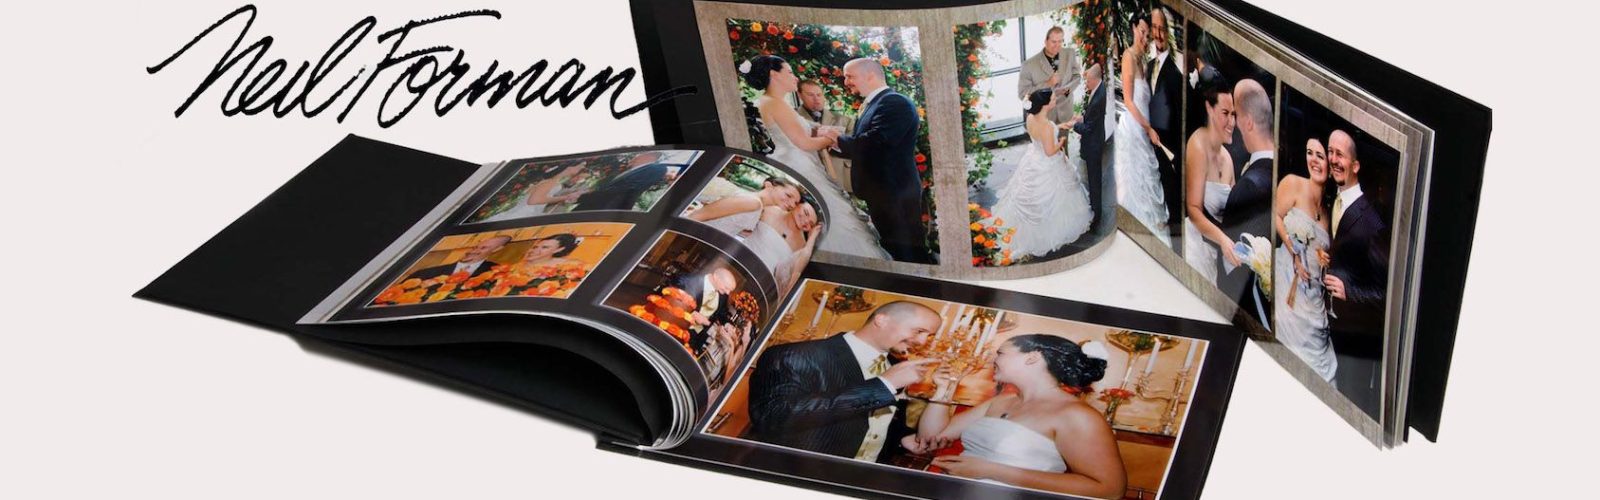 Wedding Photography Banner - Photo by Neil Forman Photography